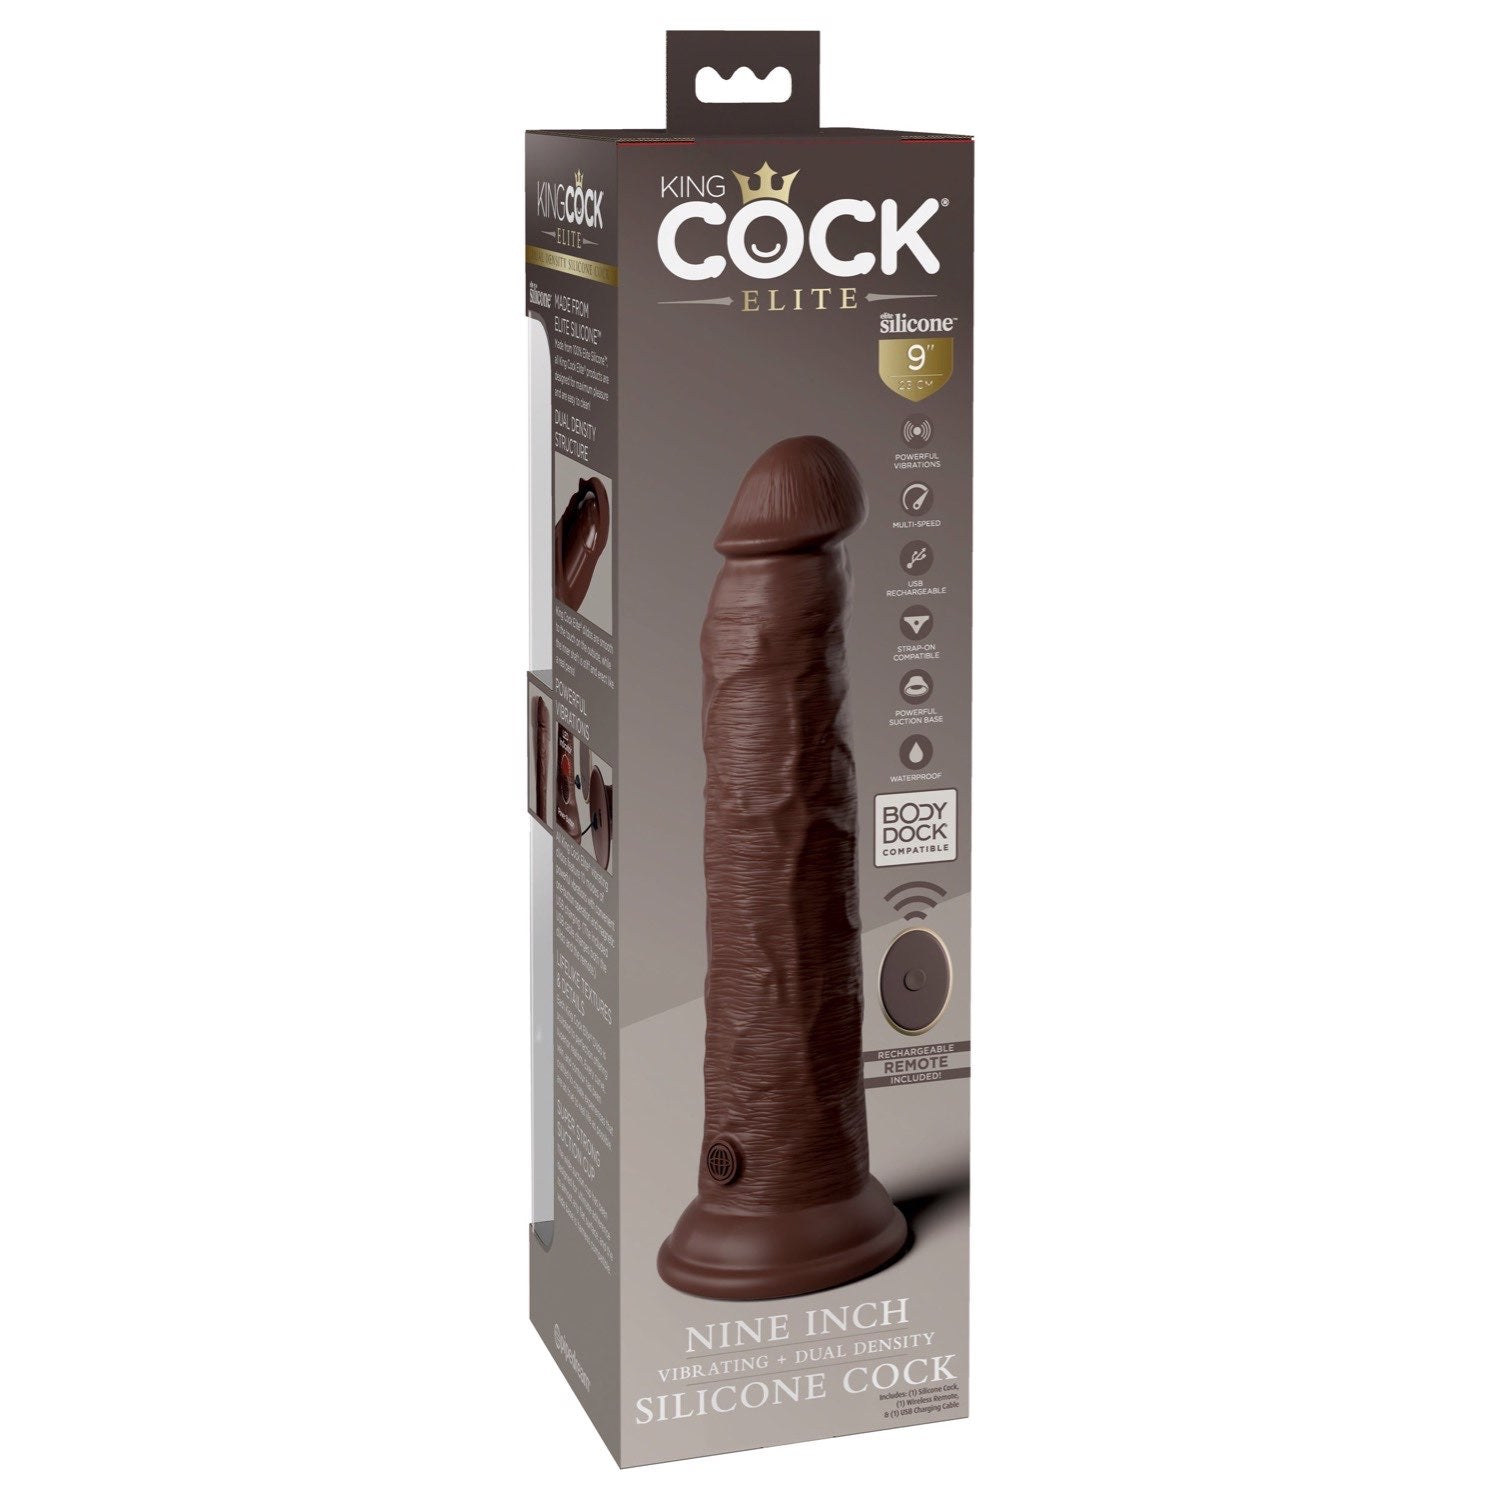 King Cock Elite 9&quot; Vibrating Dual Density Cock with Remote - Brown 22.9 cm USB Rechargeable Vibrating Dong by Pipedream